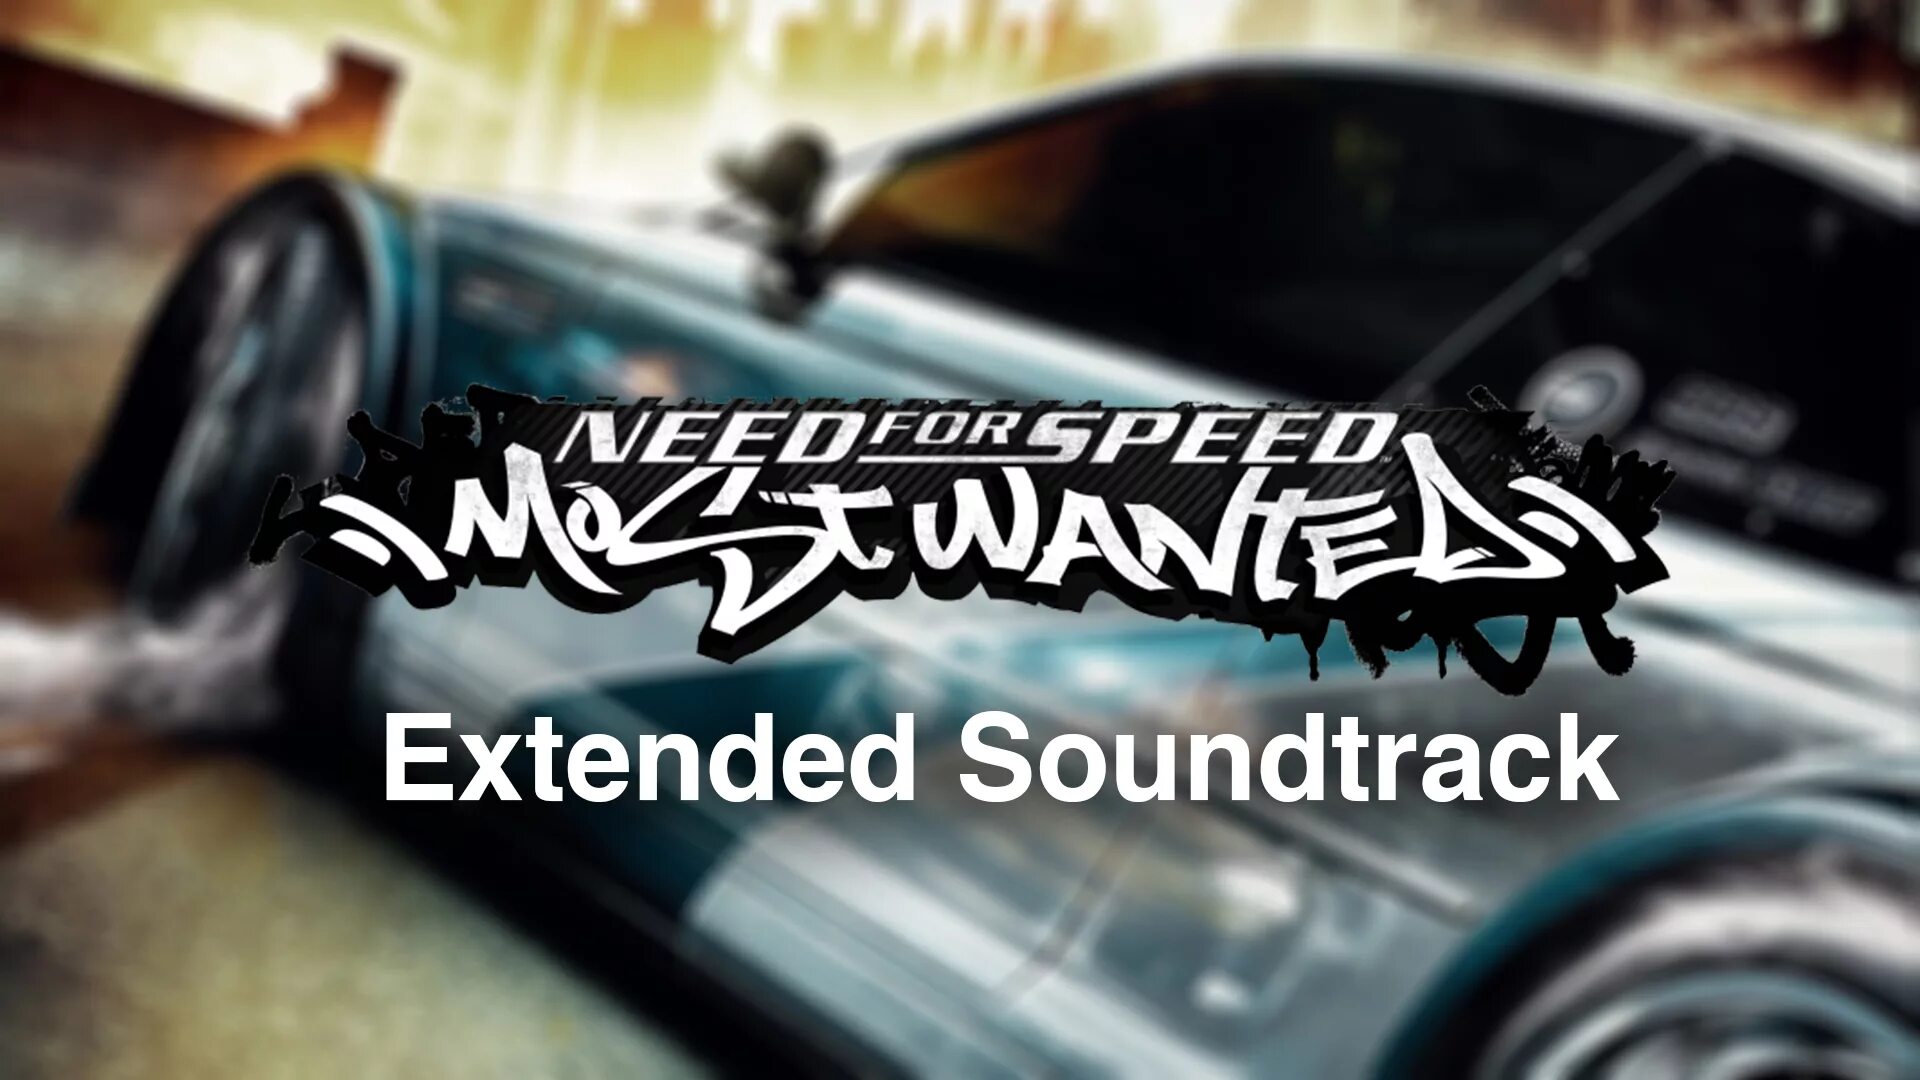 Логотип NFS most wanted 2005. NFS most wanted 2005 logo. NFS most wanted 2005 загрузочный экран. Постер нфс мост вантед 2005. Need for speed most wanted песни